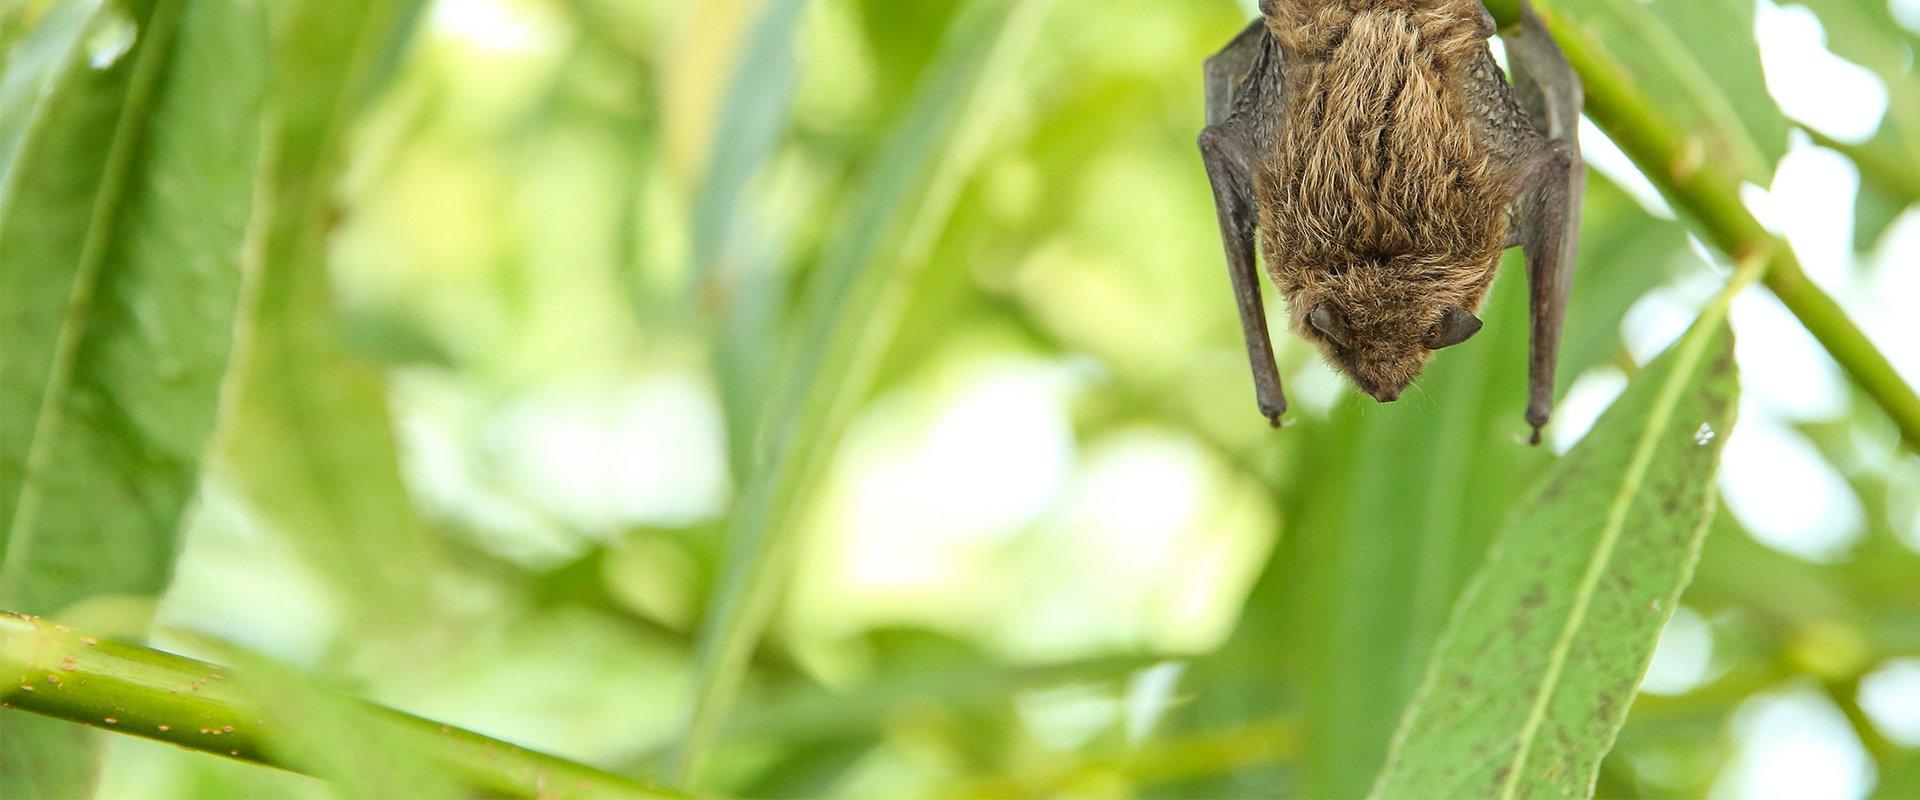 bat hanging from a plant